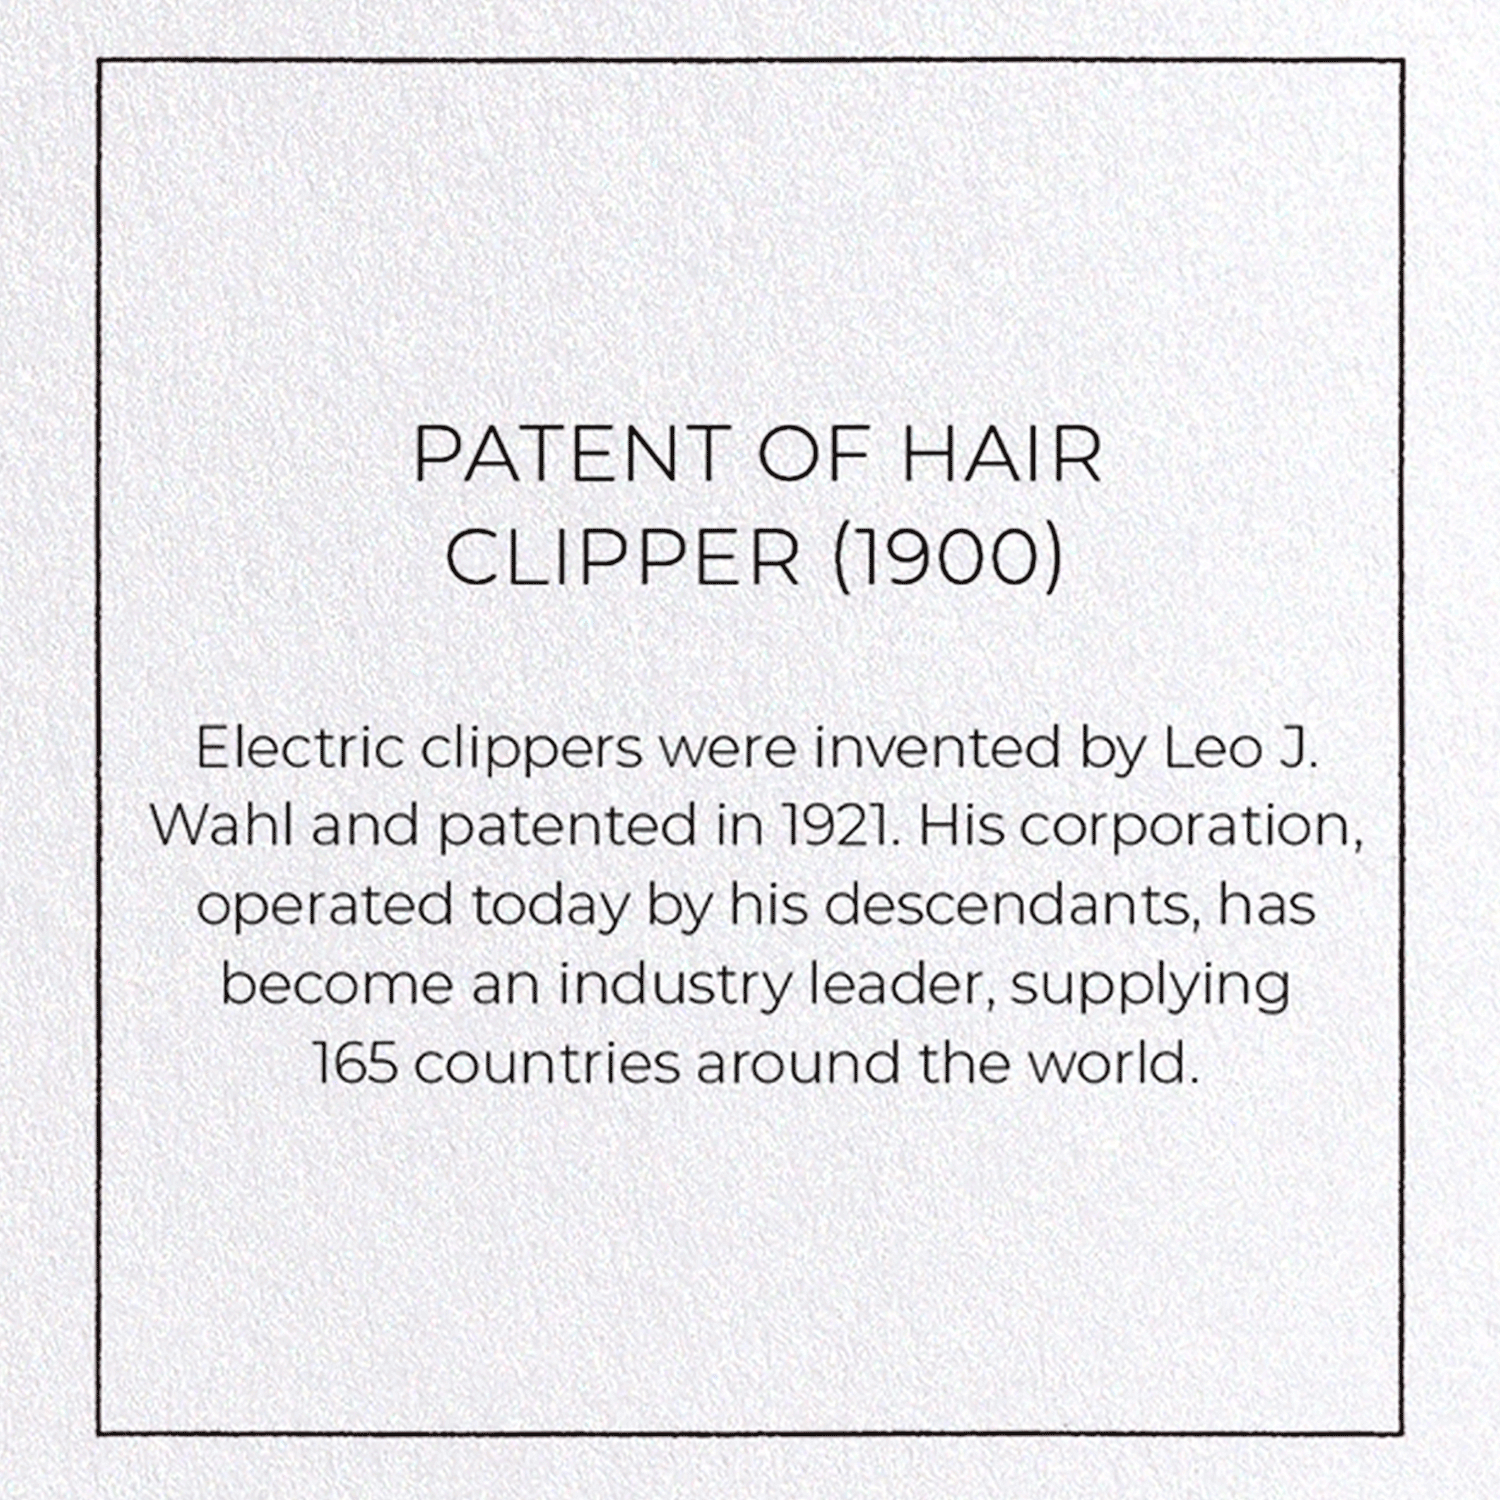 PATENT OF HAIR CLIPPER (1900)